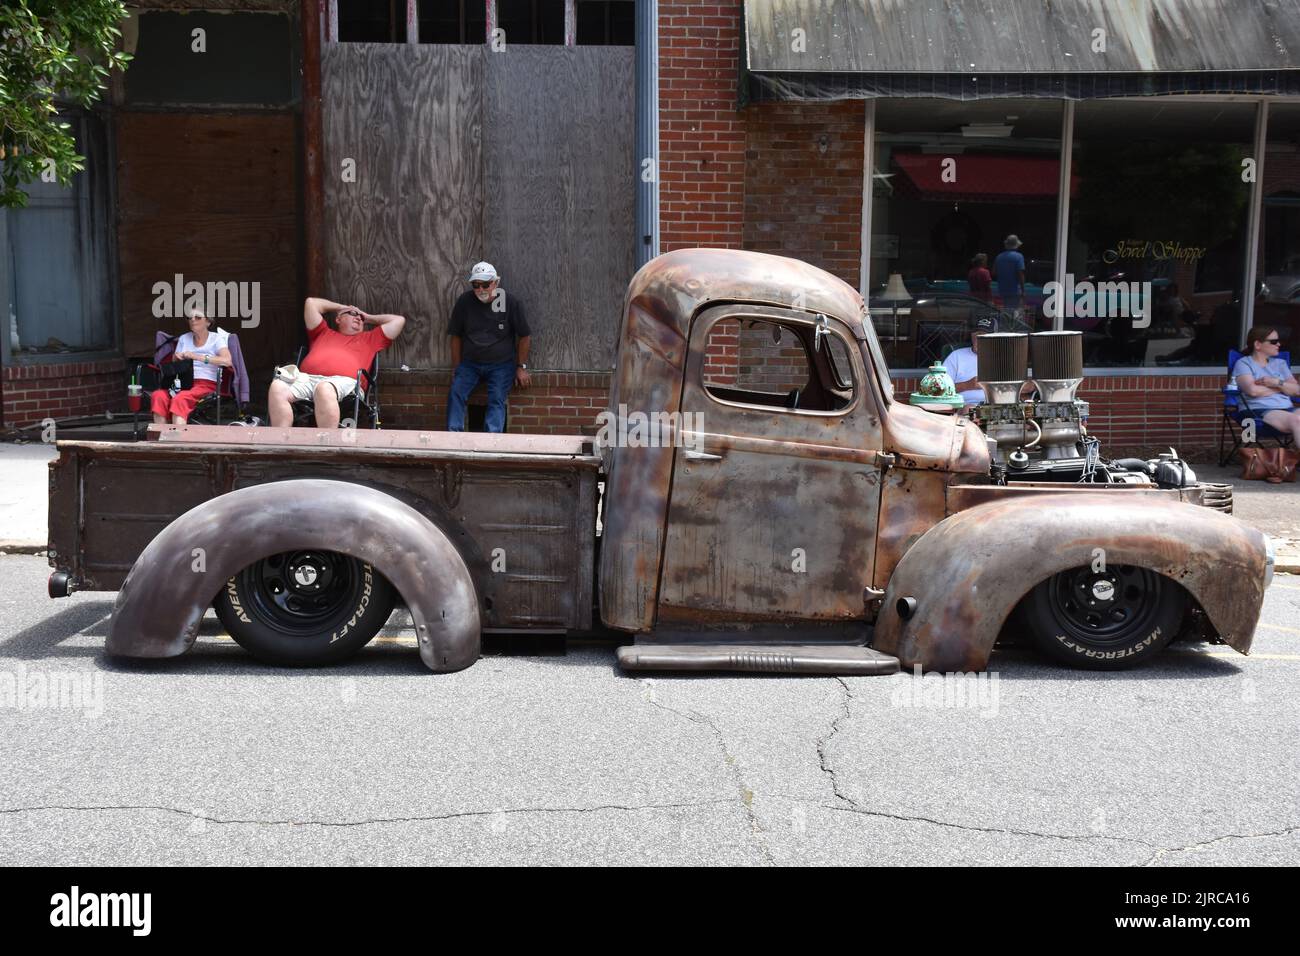 A vintage Pickup Truck built up as a Rat Rod on display at a car show. Stock Photo